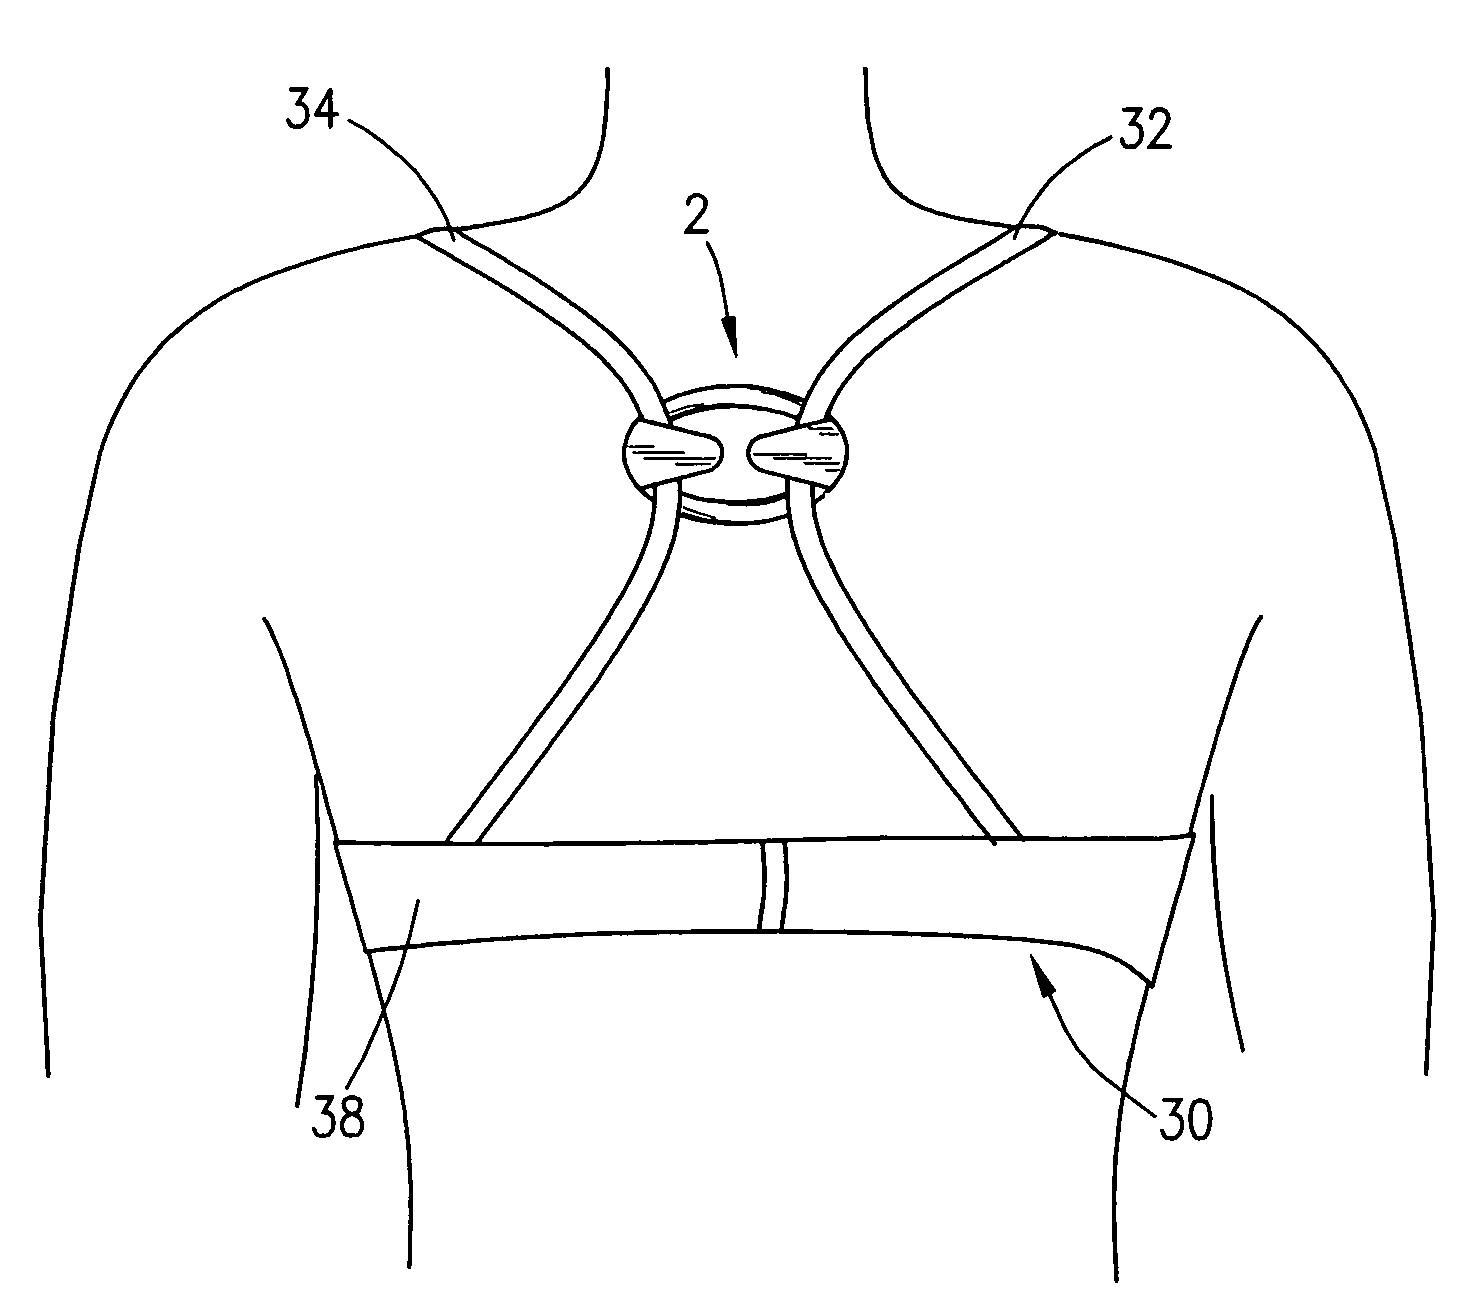 Apparatus for enhancing cleavage and method